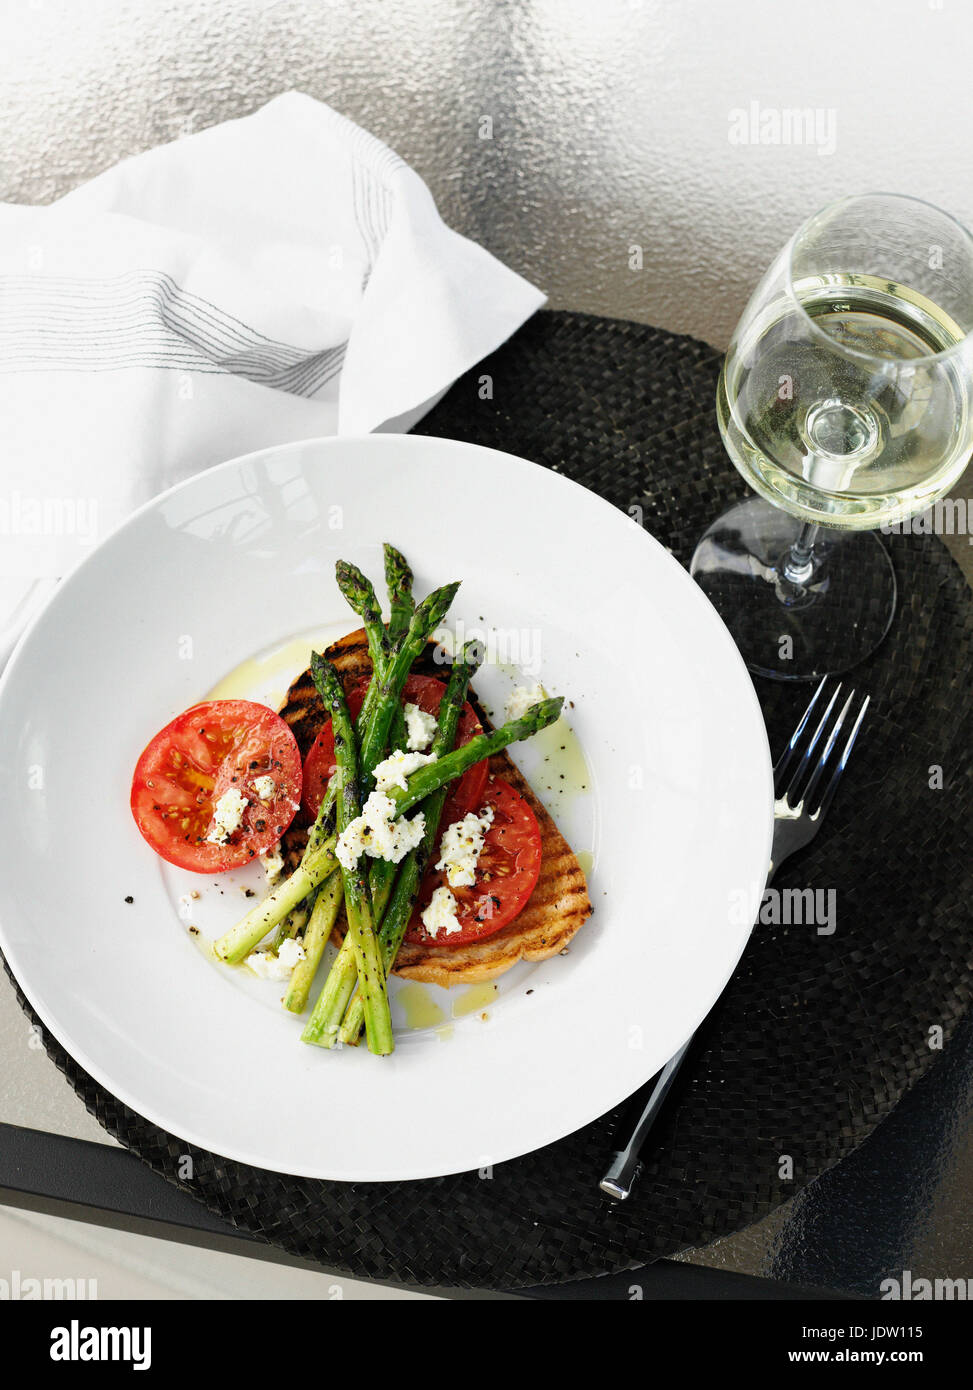 Plate of fish, asparagus and tomato Stock Photo